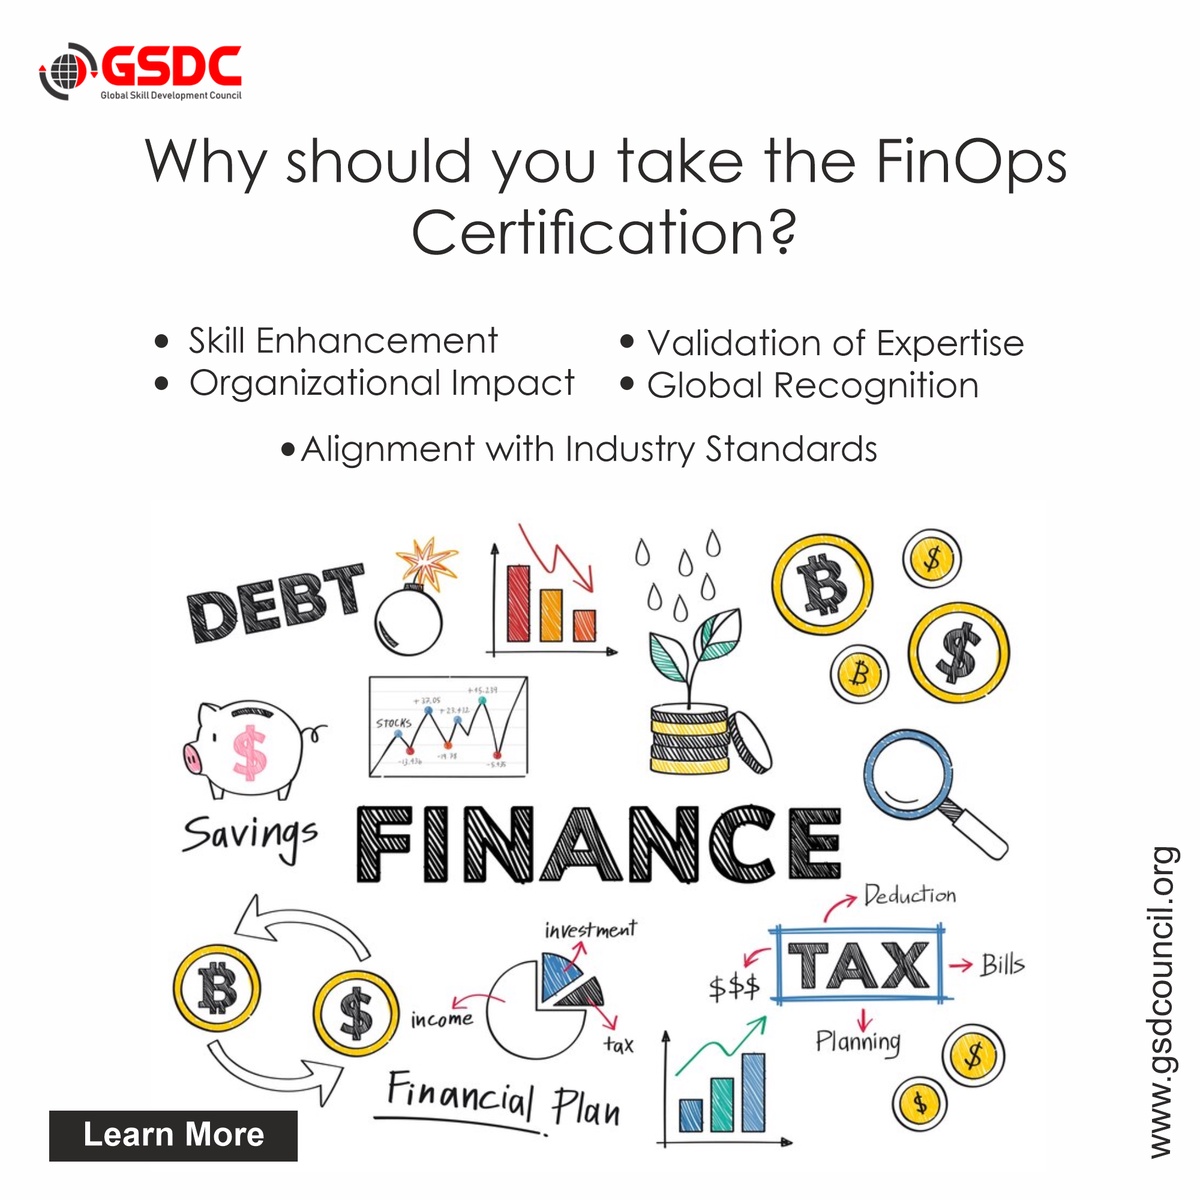 Why should you take the FinOps Certification?